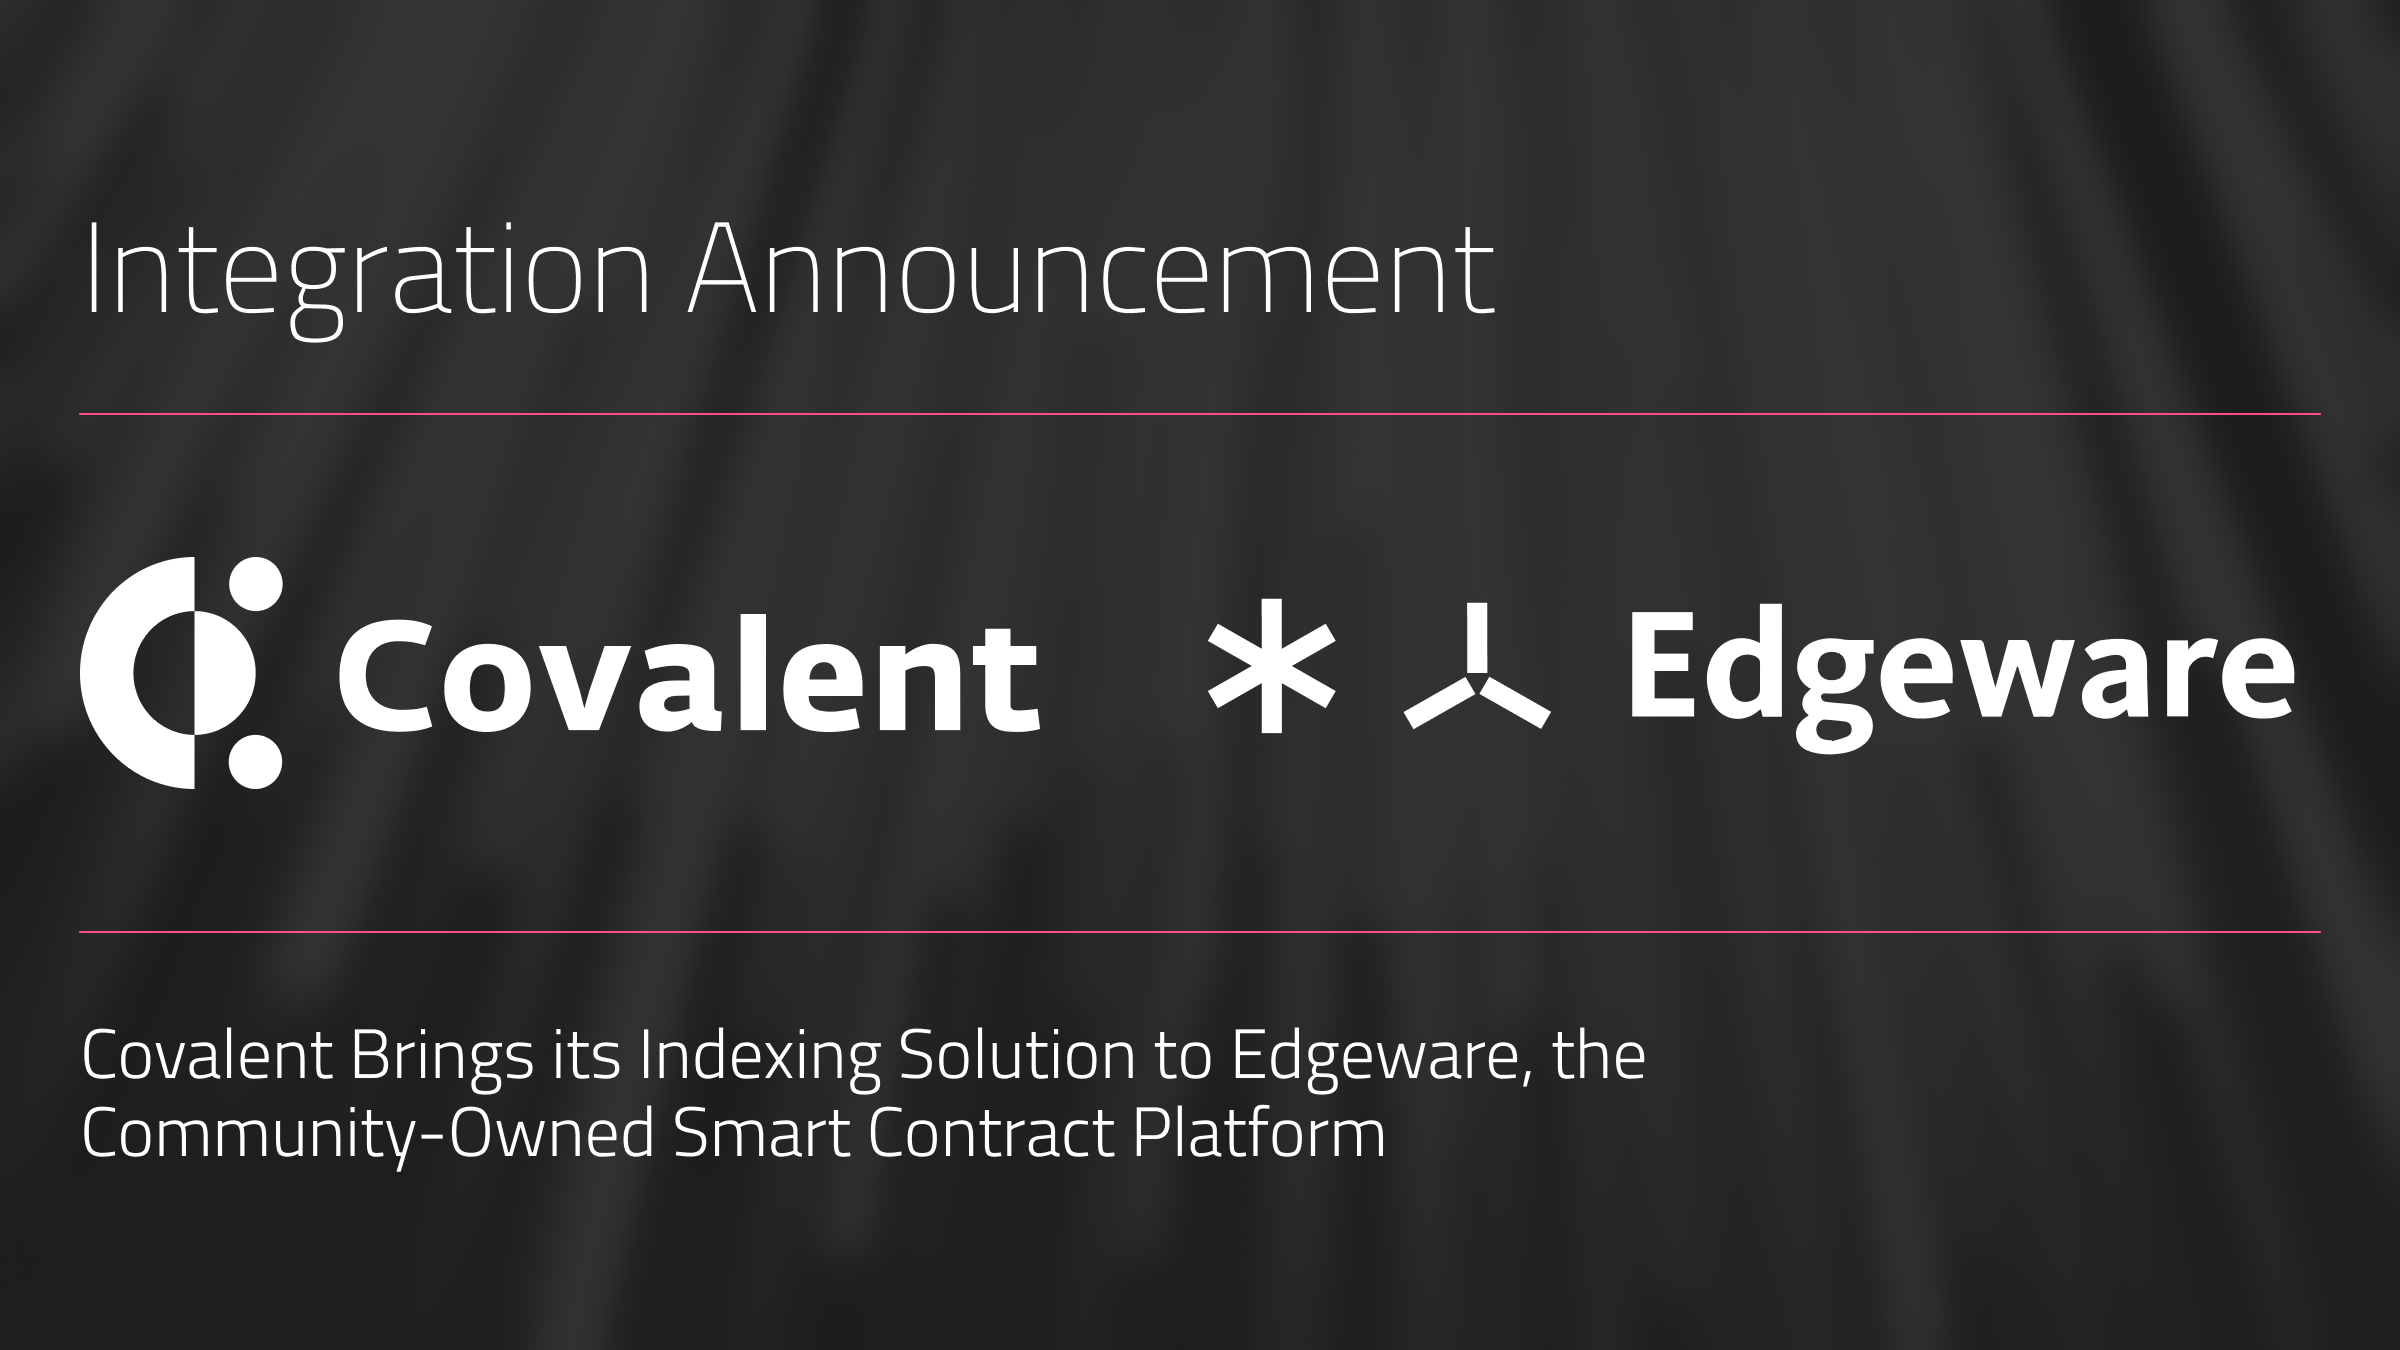 Covalent Brings its Indexing Solution to Edgeware, the Community-Owned Smart Contract Platform